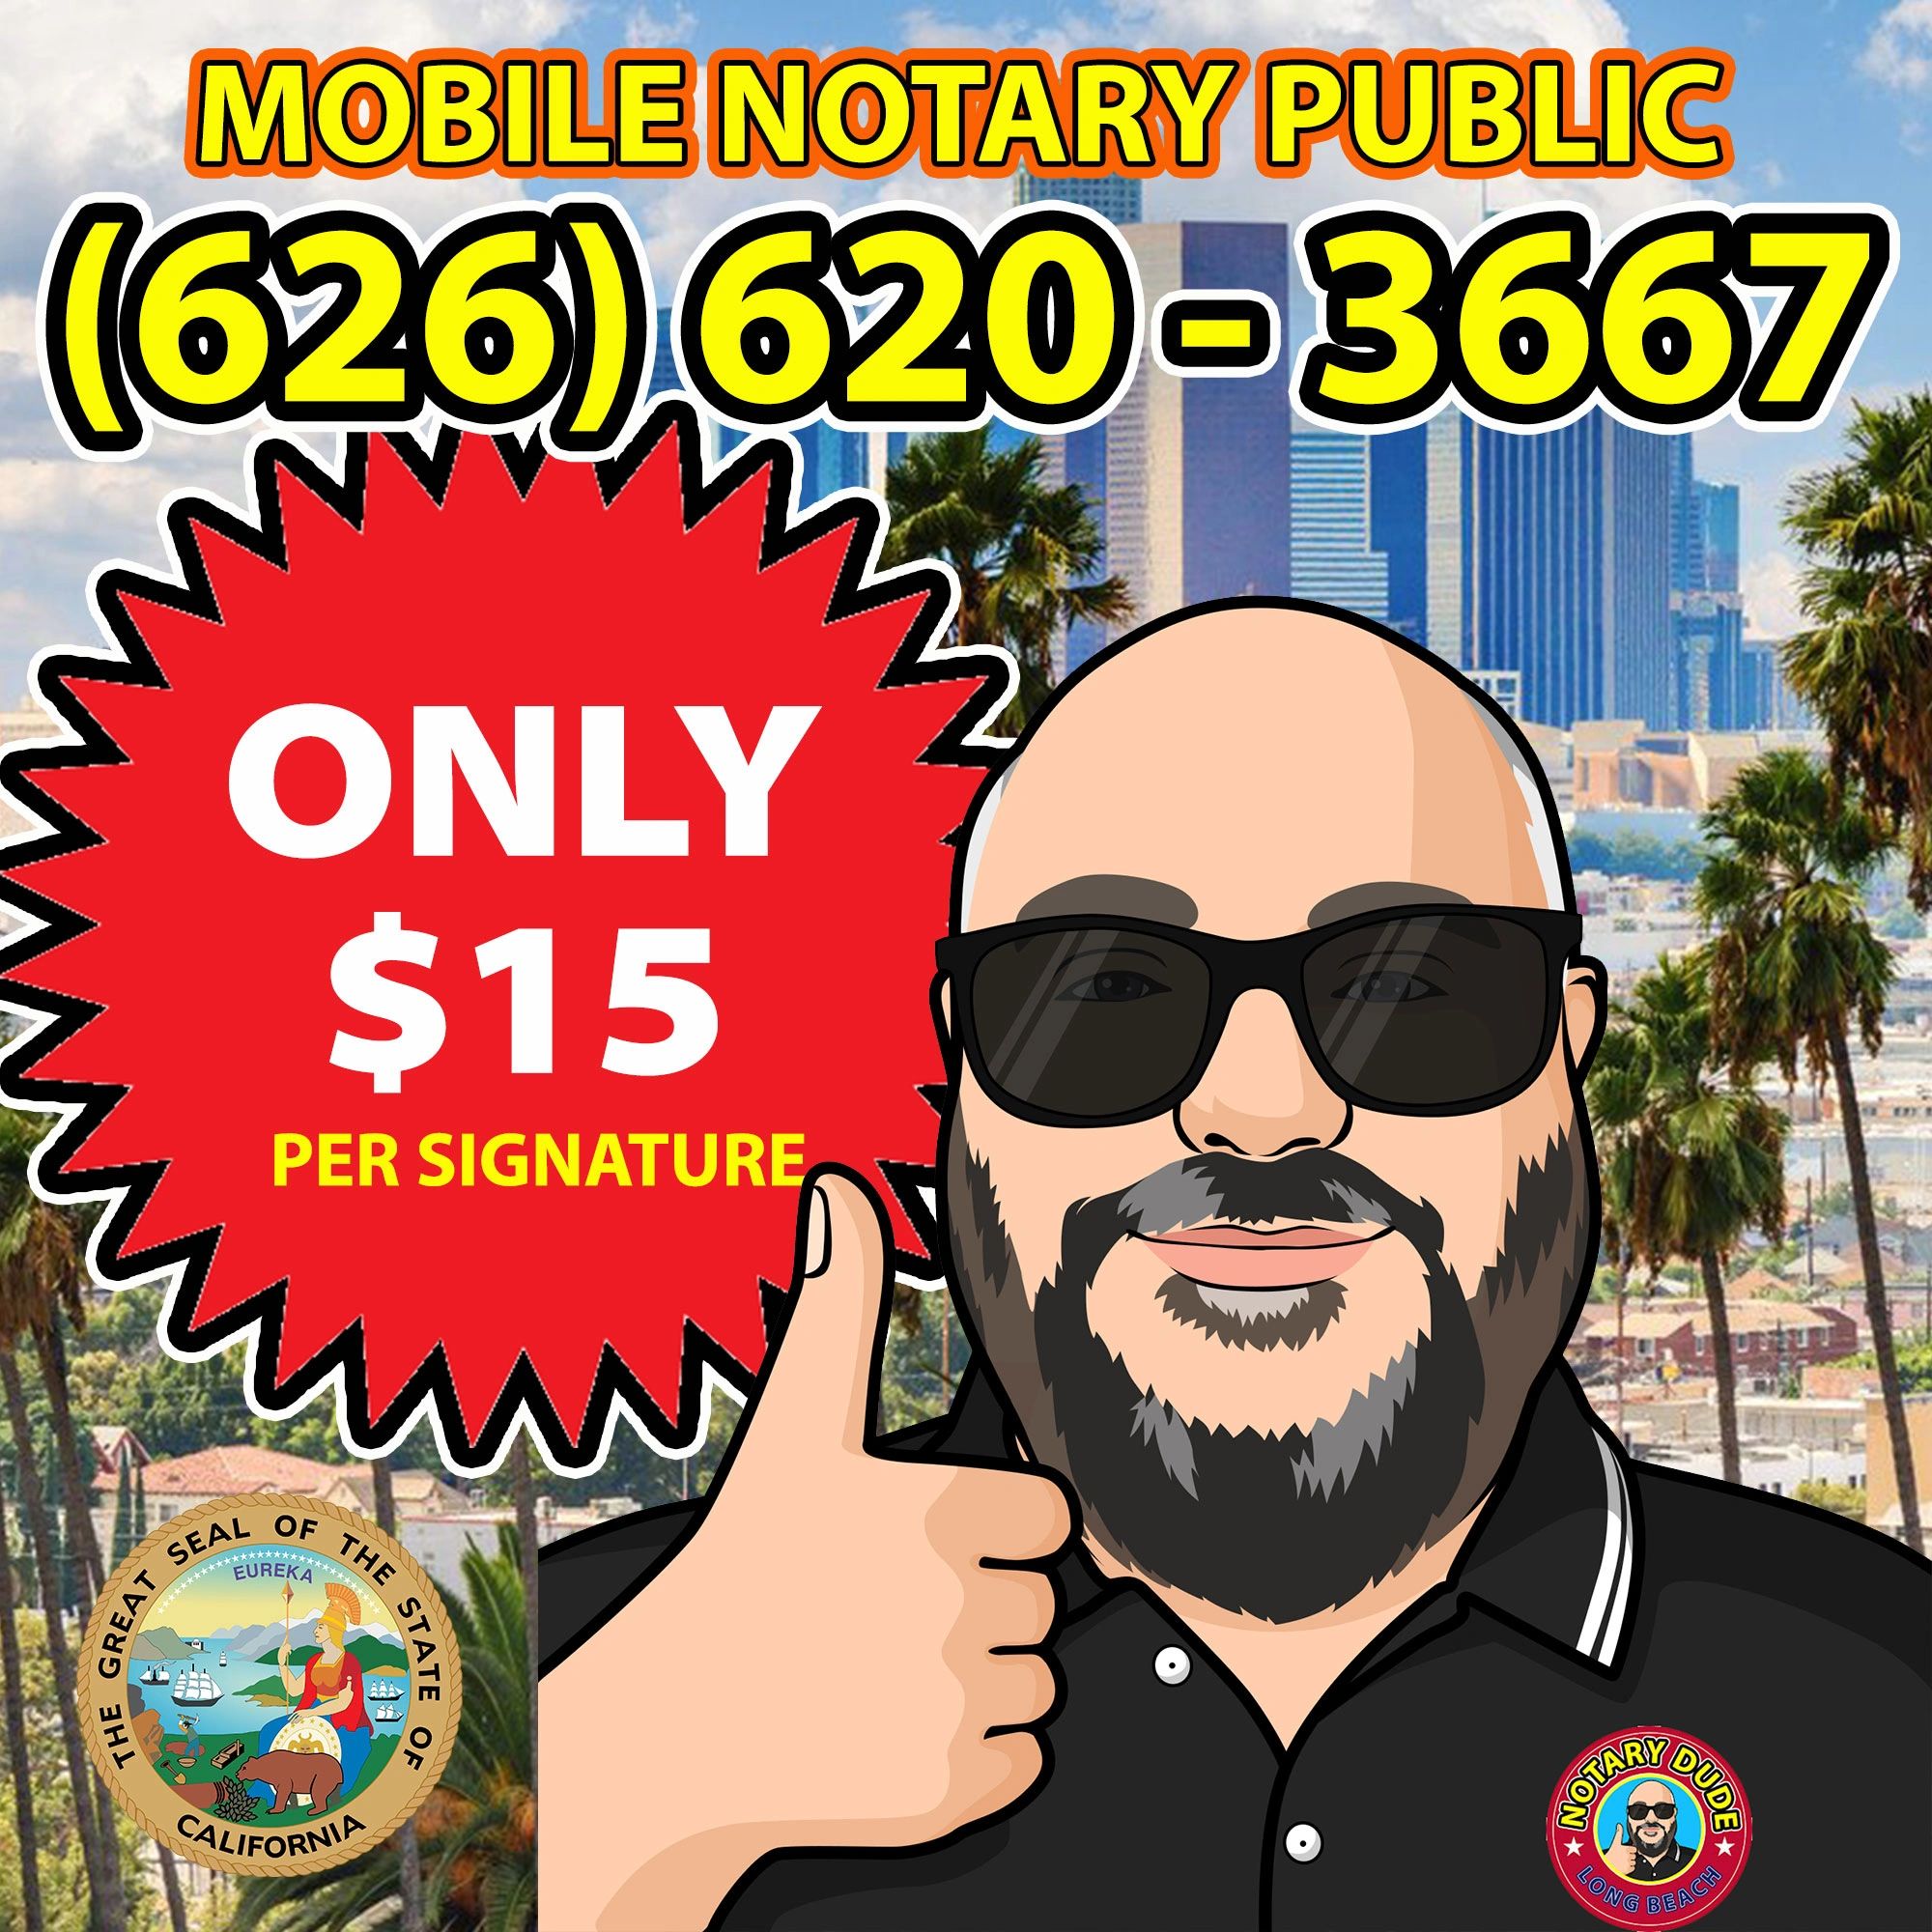 Notary Public Los Angeles, Notary Near Me, Mobile Notary Public, Notary